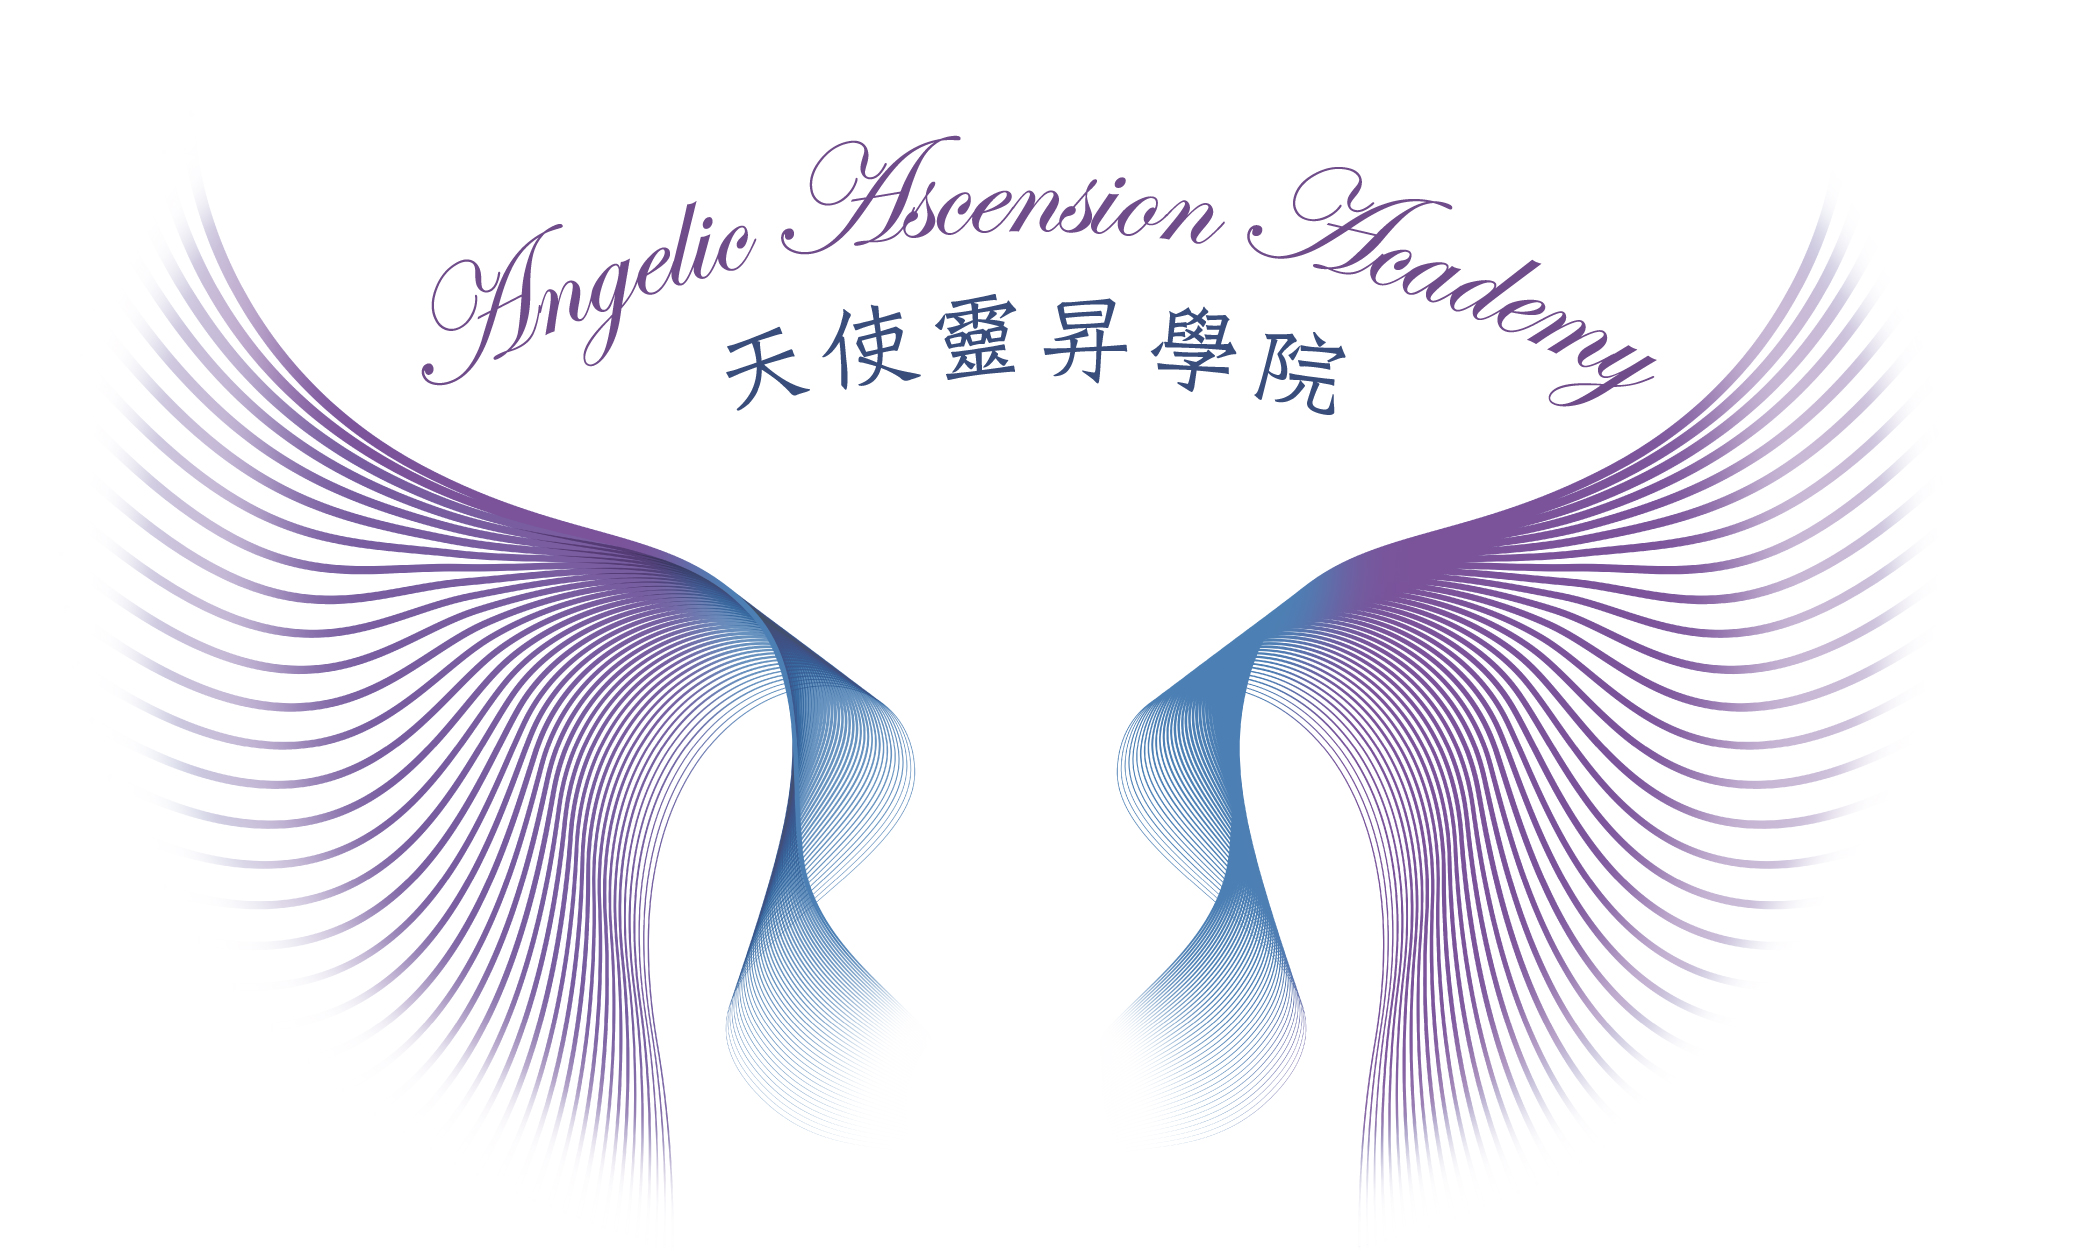 Angelic Ascension Academy Company